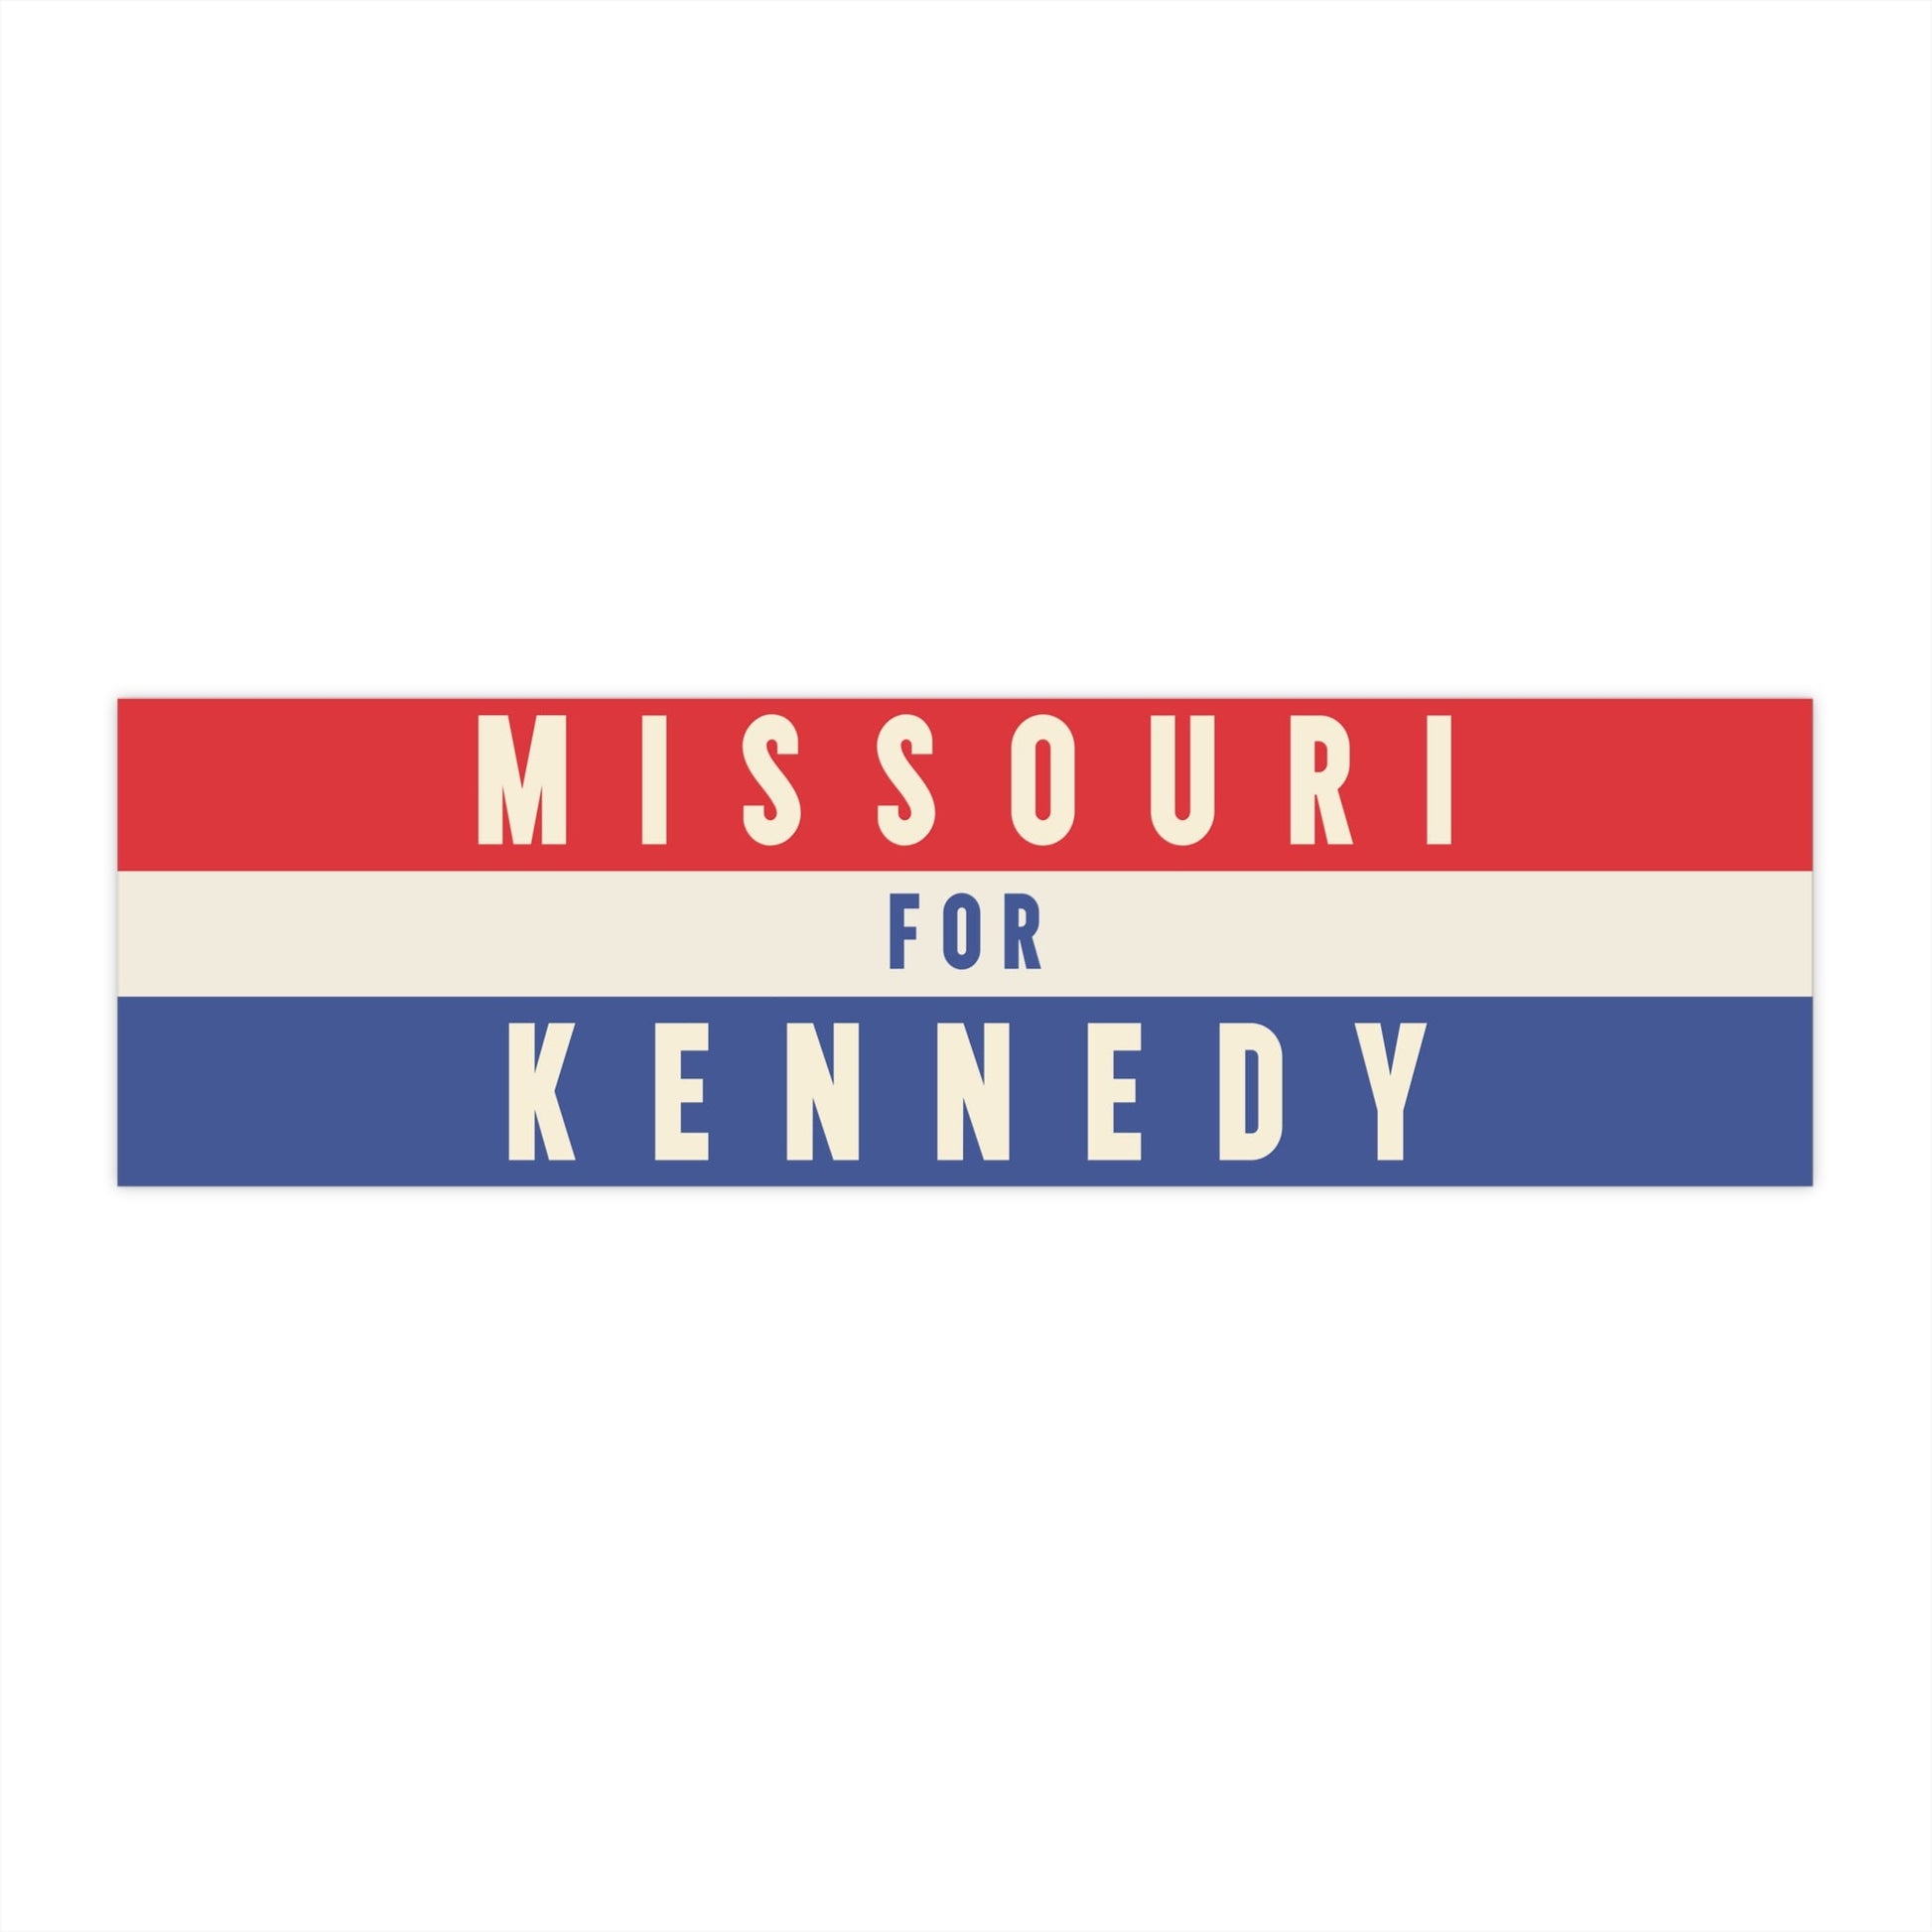 Missouri for Kennedy Bumper Sticker - TEAM KENNEDY. All rights reserved